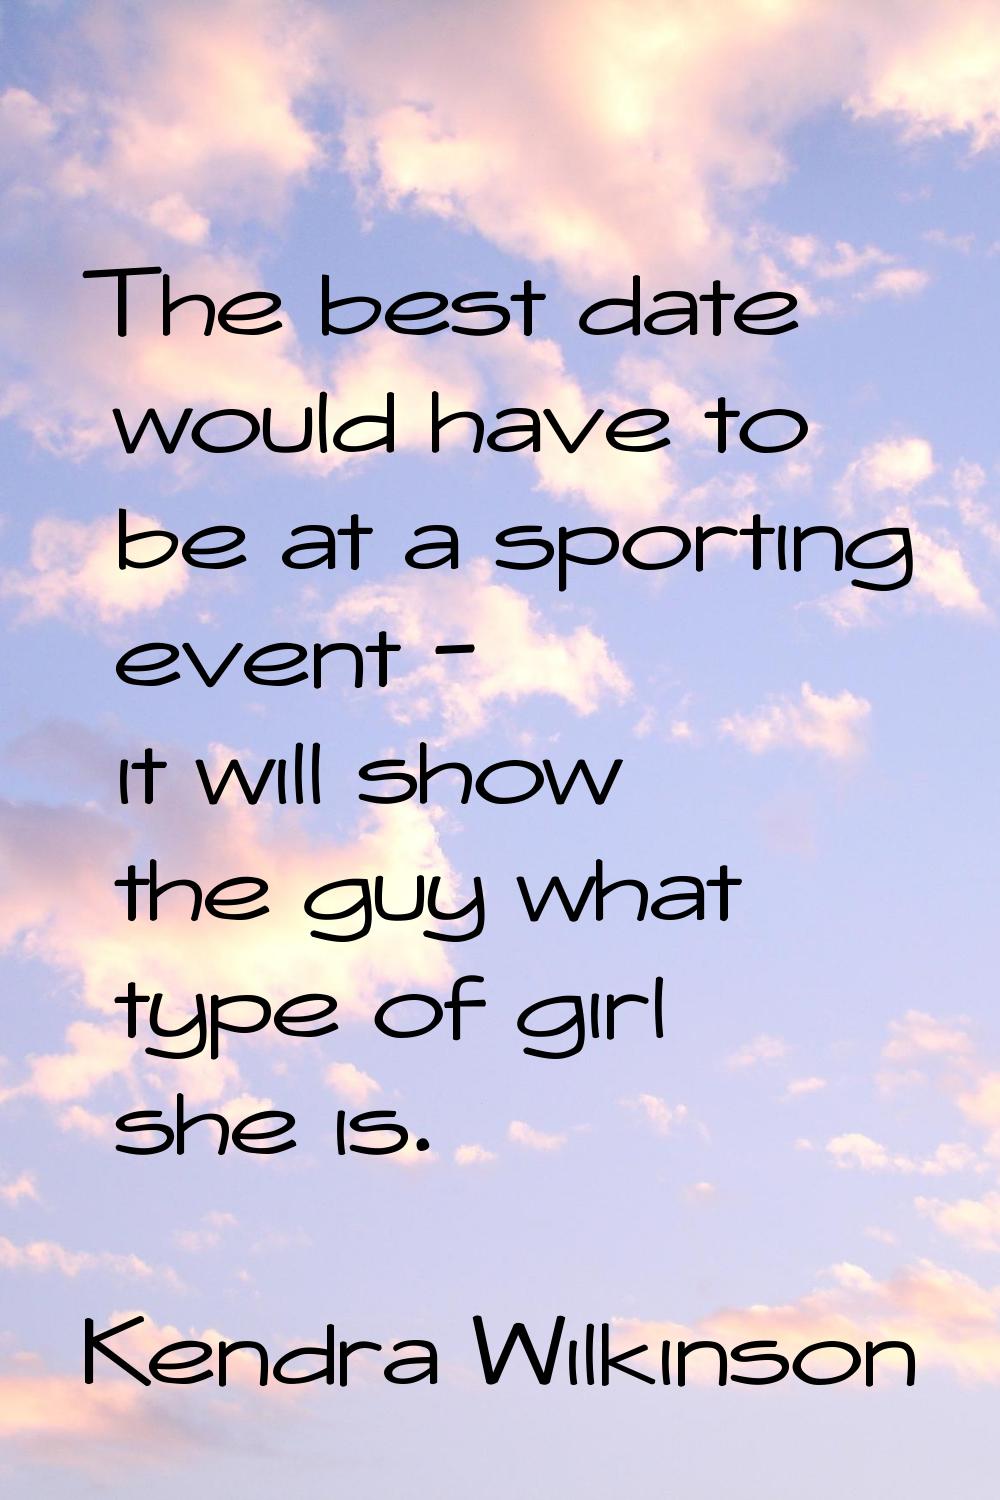 The best date would have to be at a sporting event - it will show the guy what type of girl she is.